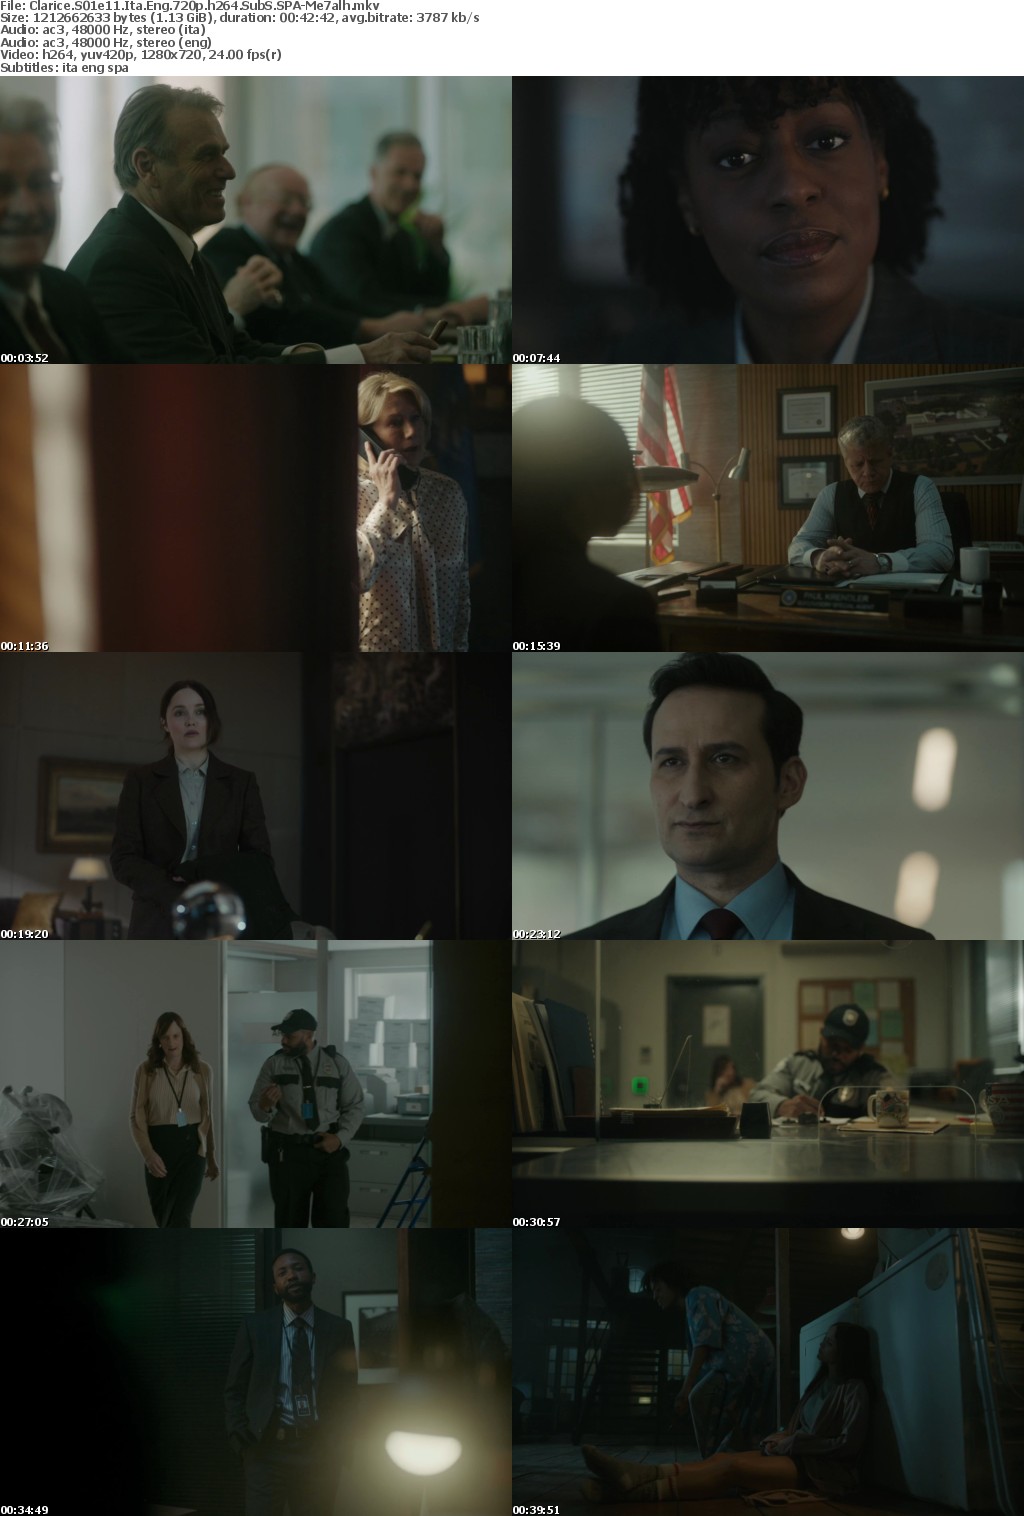 Clarice S01e11 720p Ita Eng SubS SPA MirCrewRelease byMe7alh